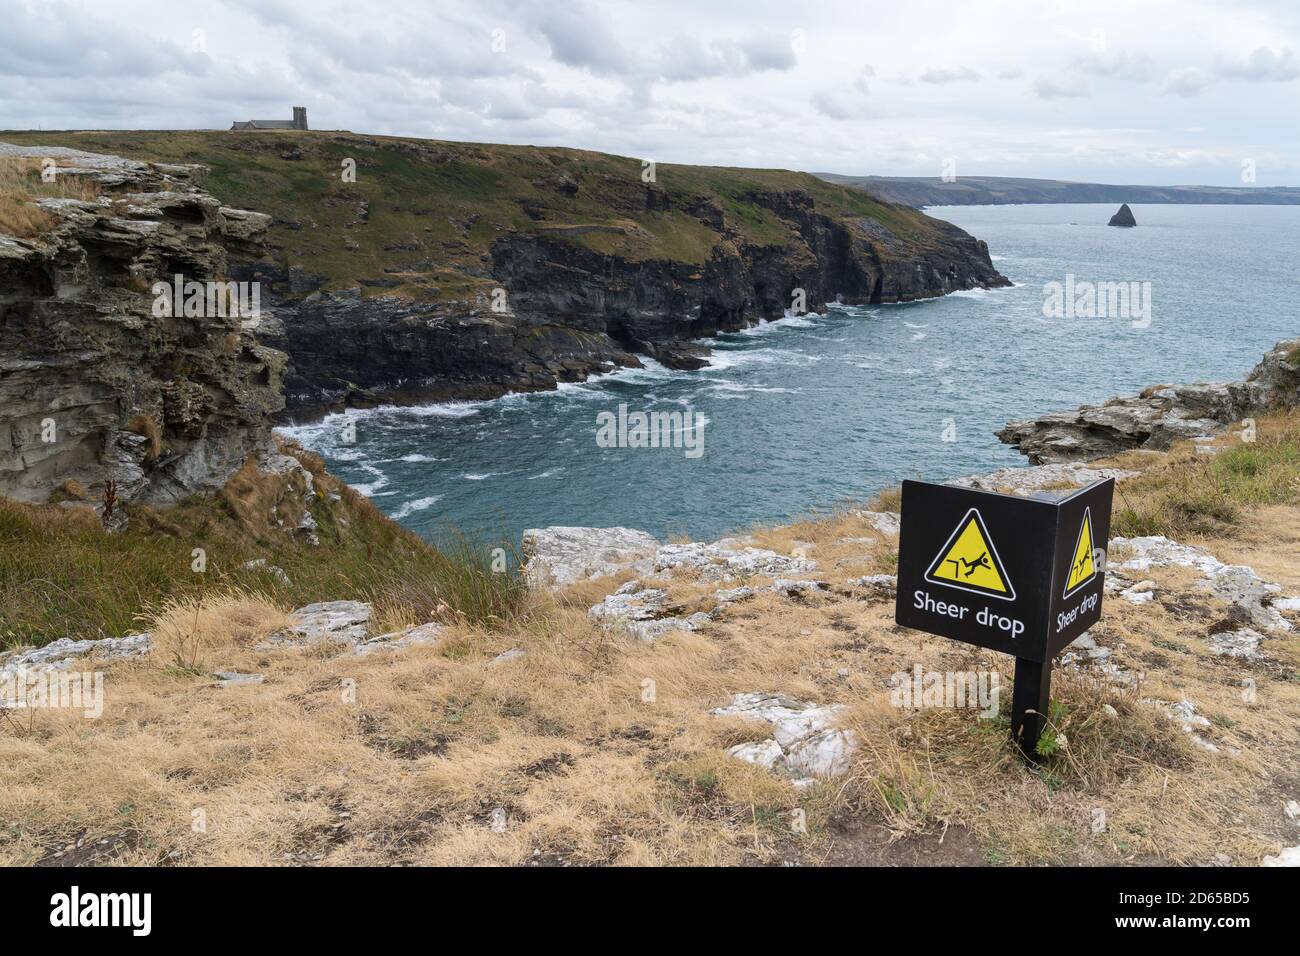 Panorama View from the top of cliffs in Cornwall, England, UK with a sign warning for danger becaise of sheer drop Stock Photo